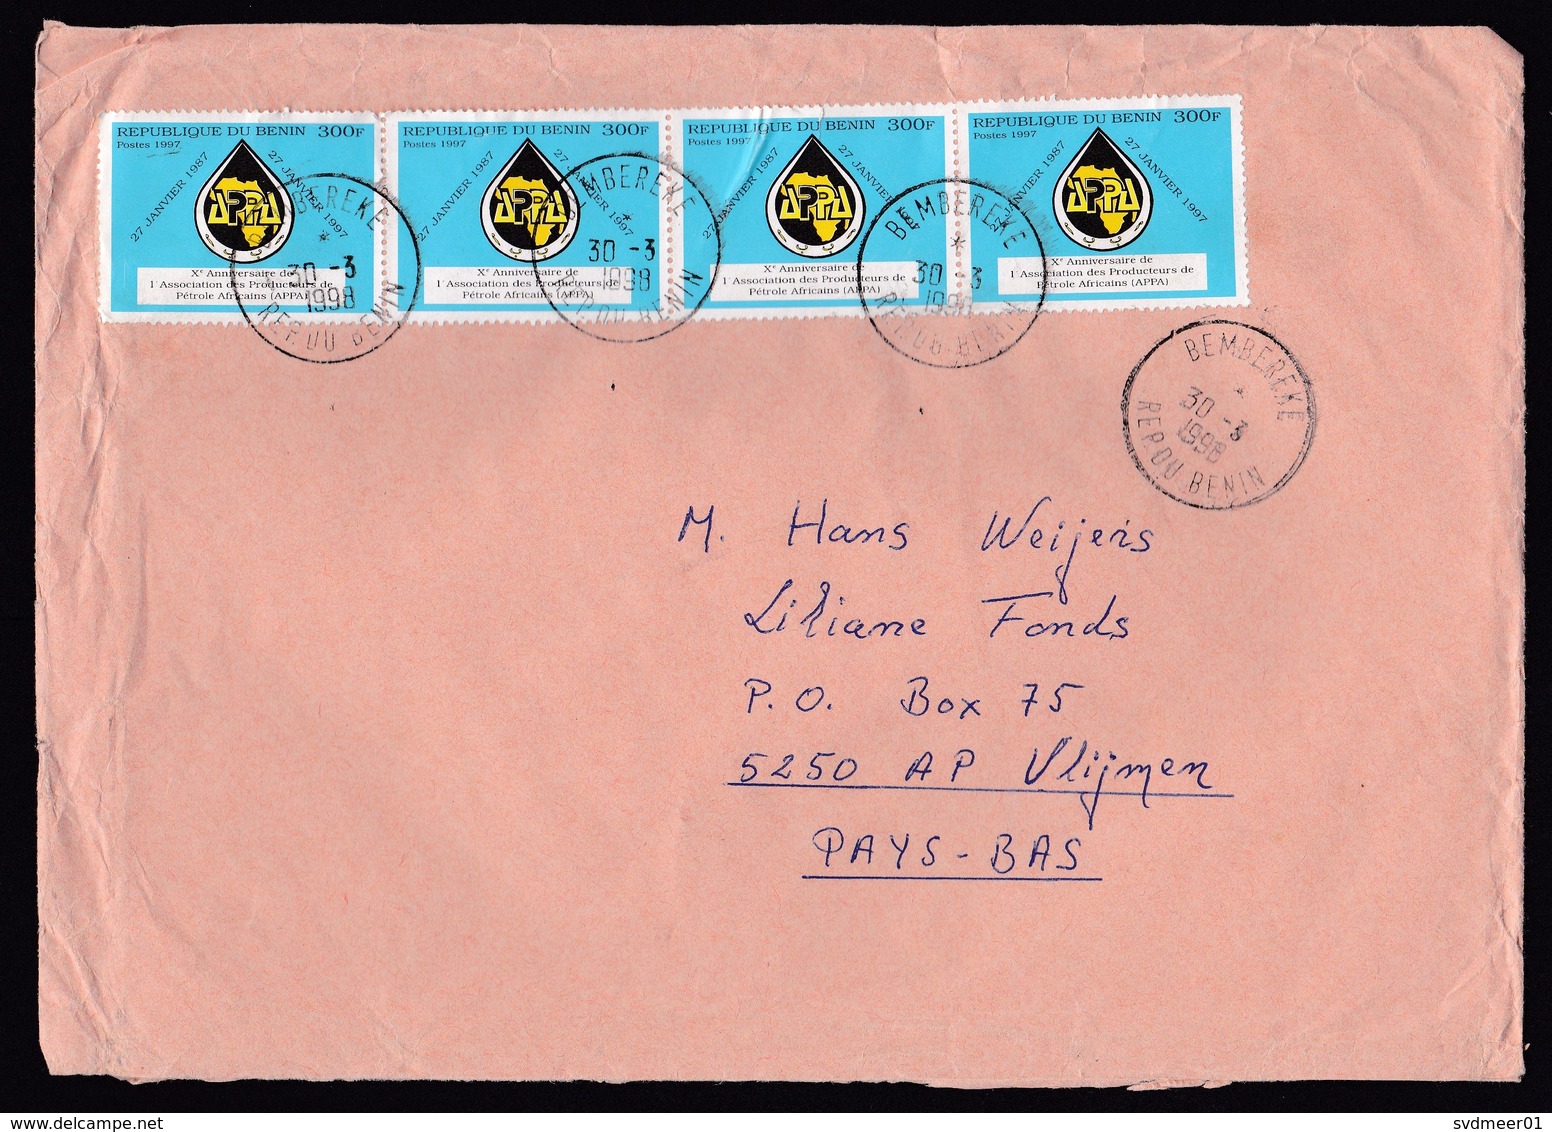 Benin: Cover Bembereke To Netherlands, 1998, 4 Stamps, APPA African Oil Producers, Energy (2 Stamps Damaged) - Benin – Dahomey (1960-...)